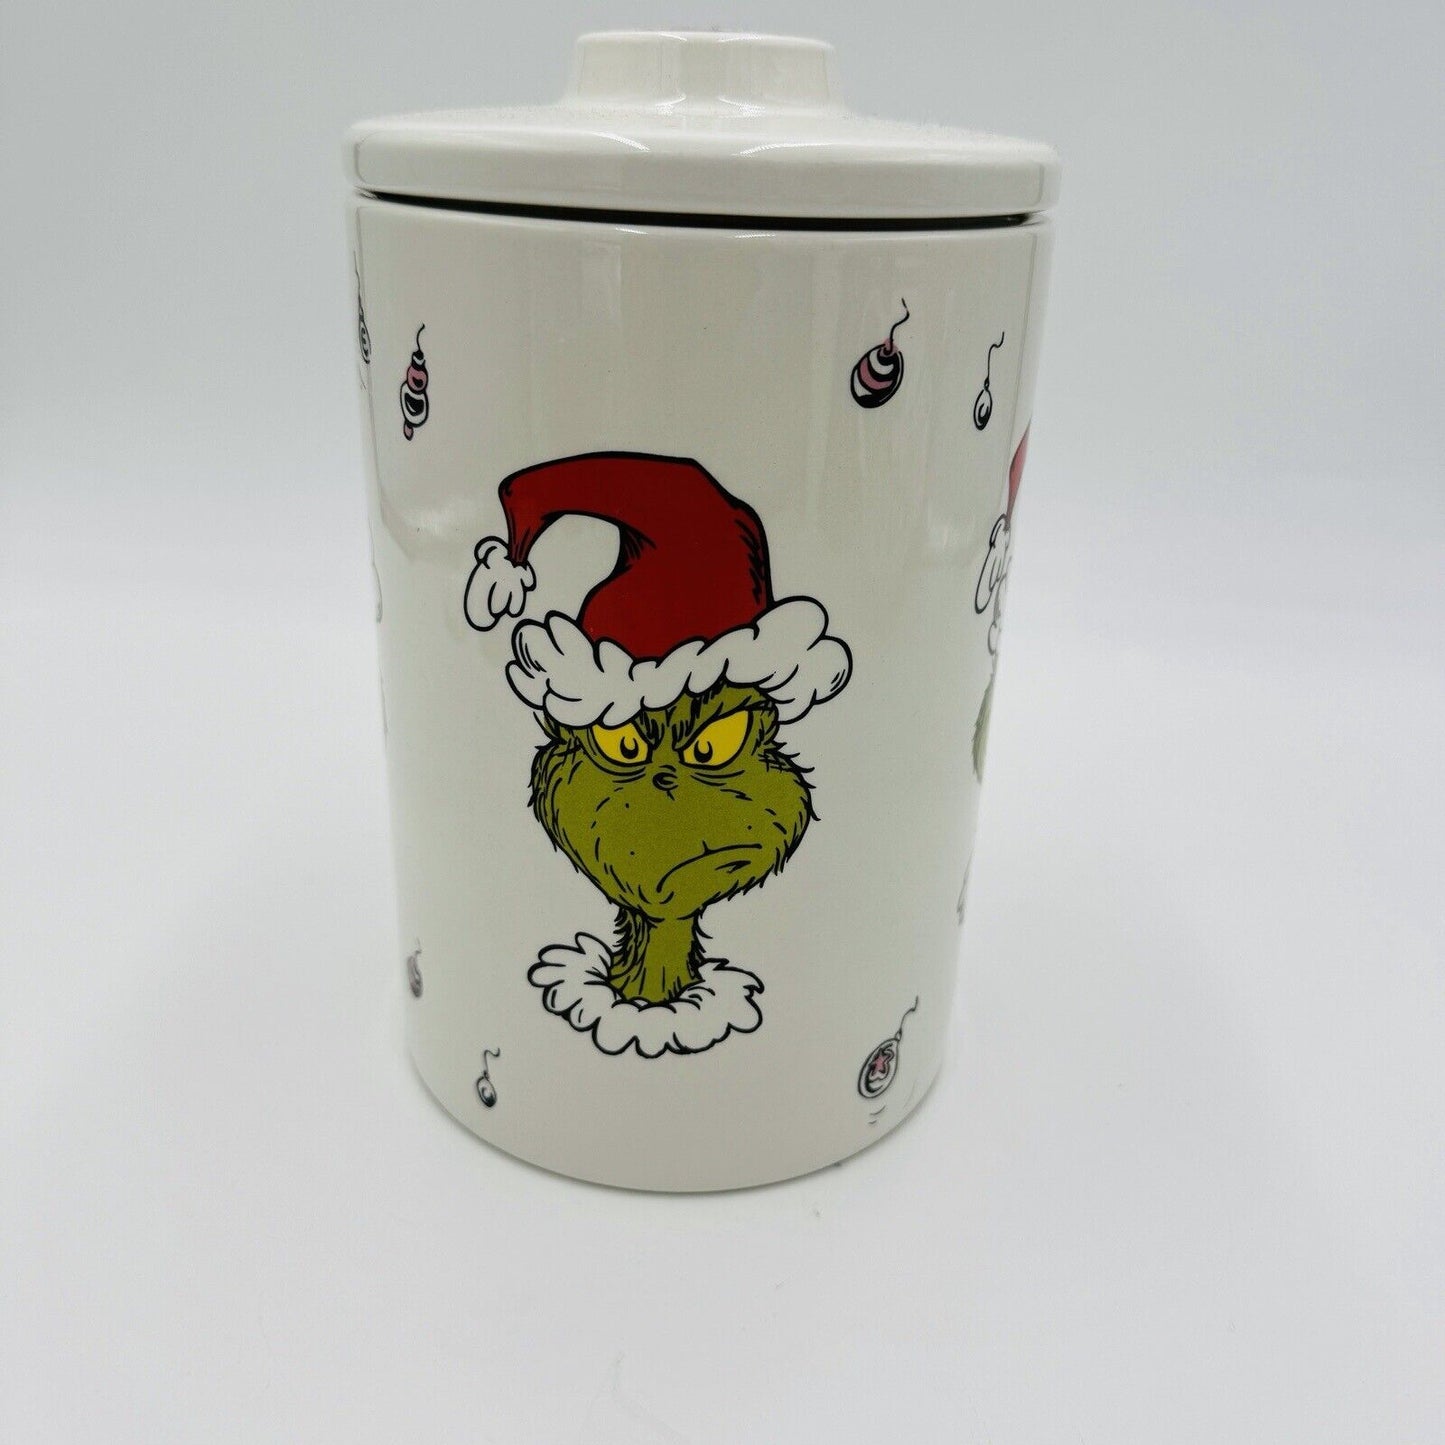 The Grinch Dr Seuss Christmas Cookie Jar Canister Ceramic Multi-faces